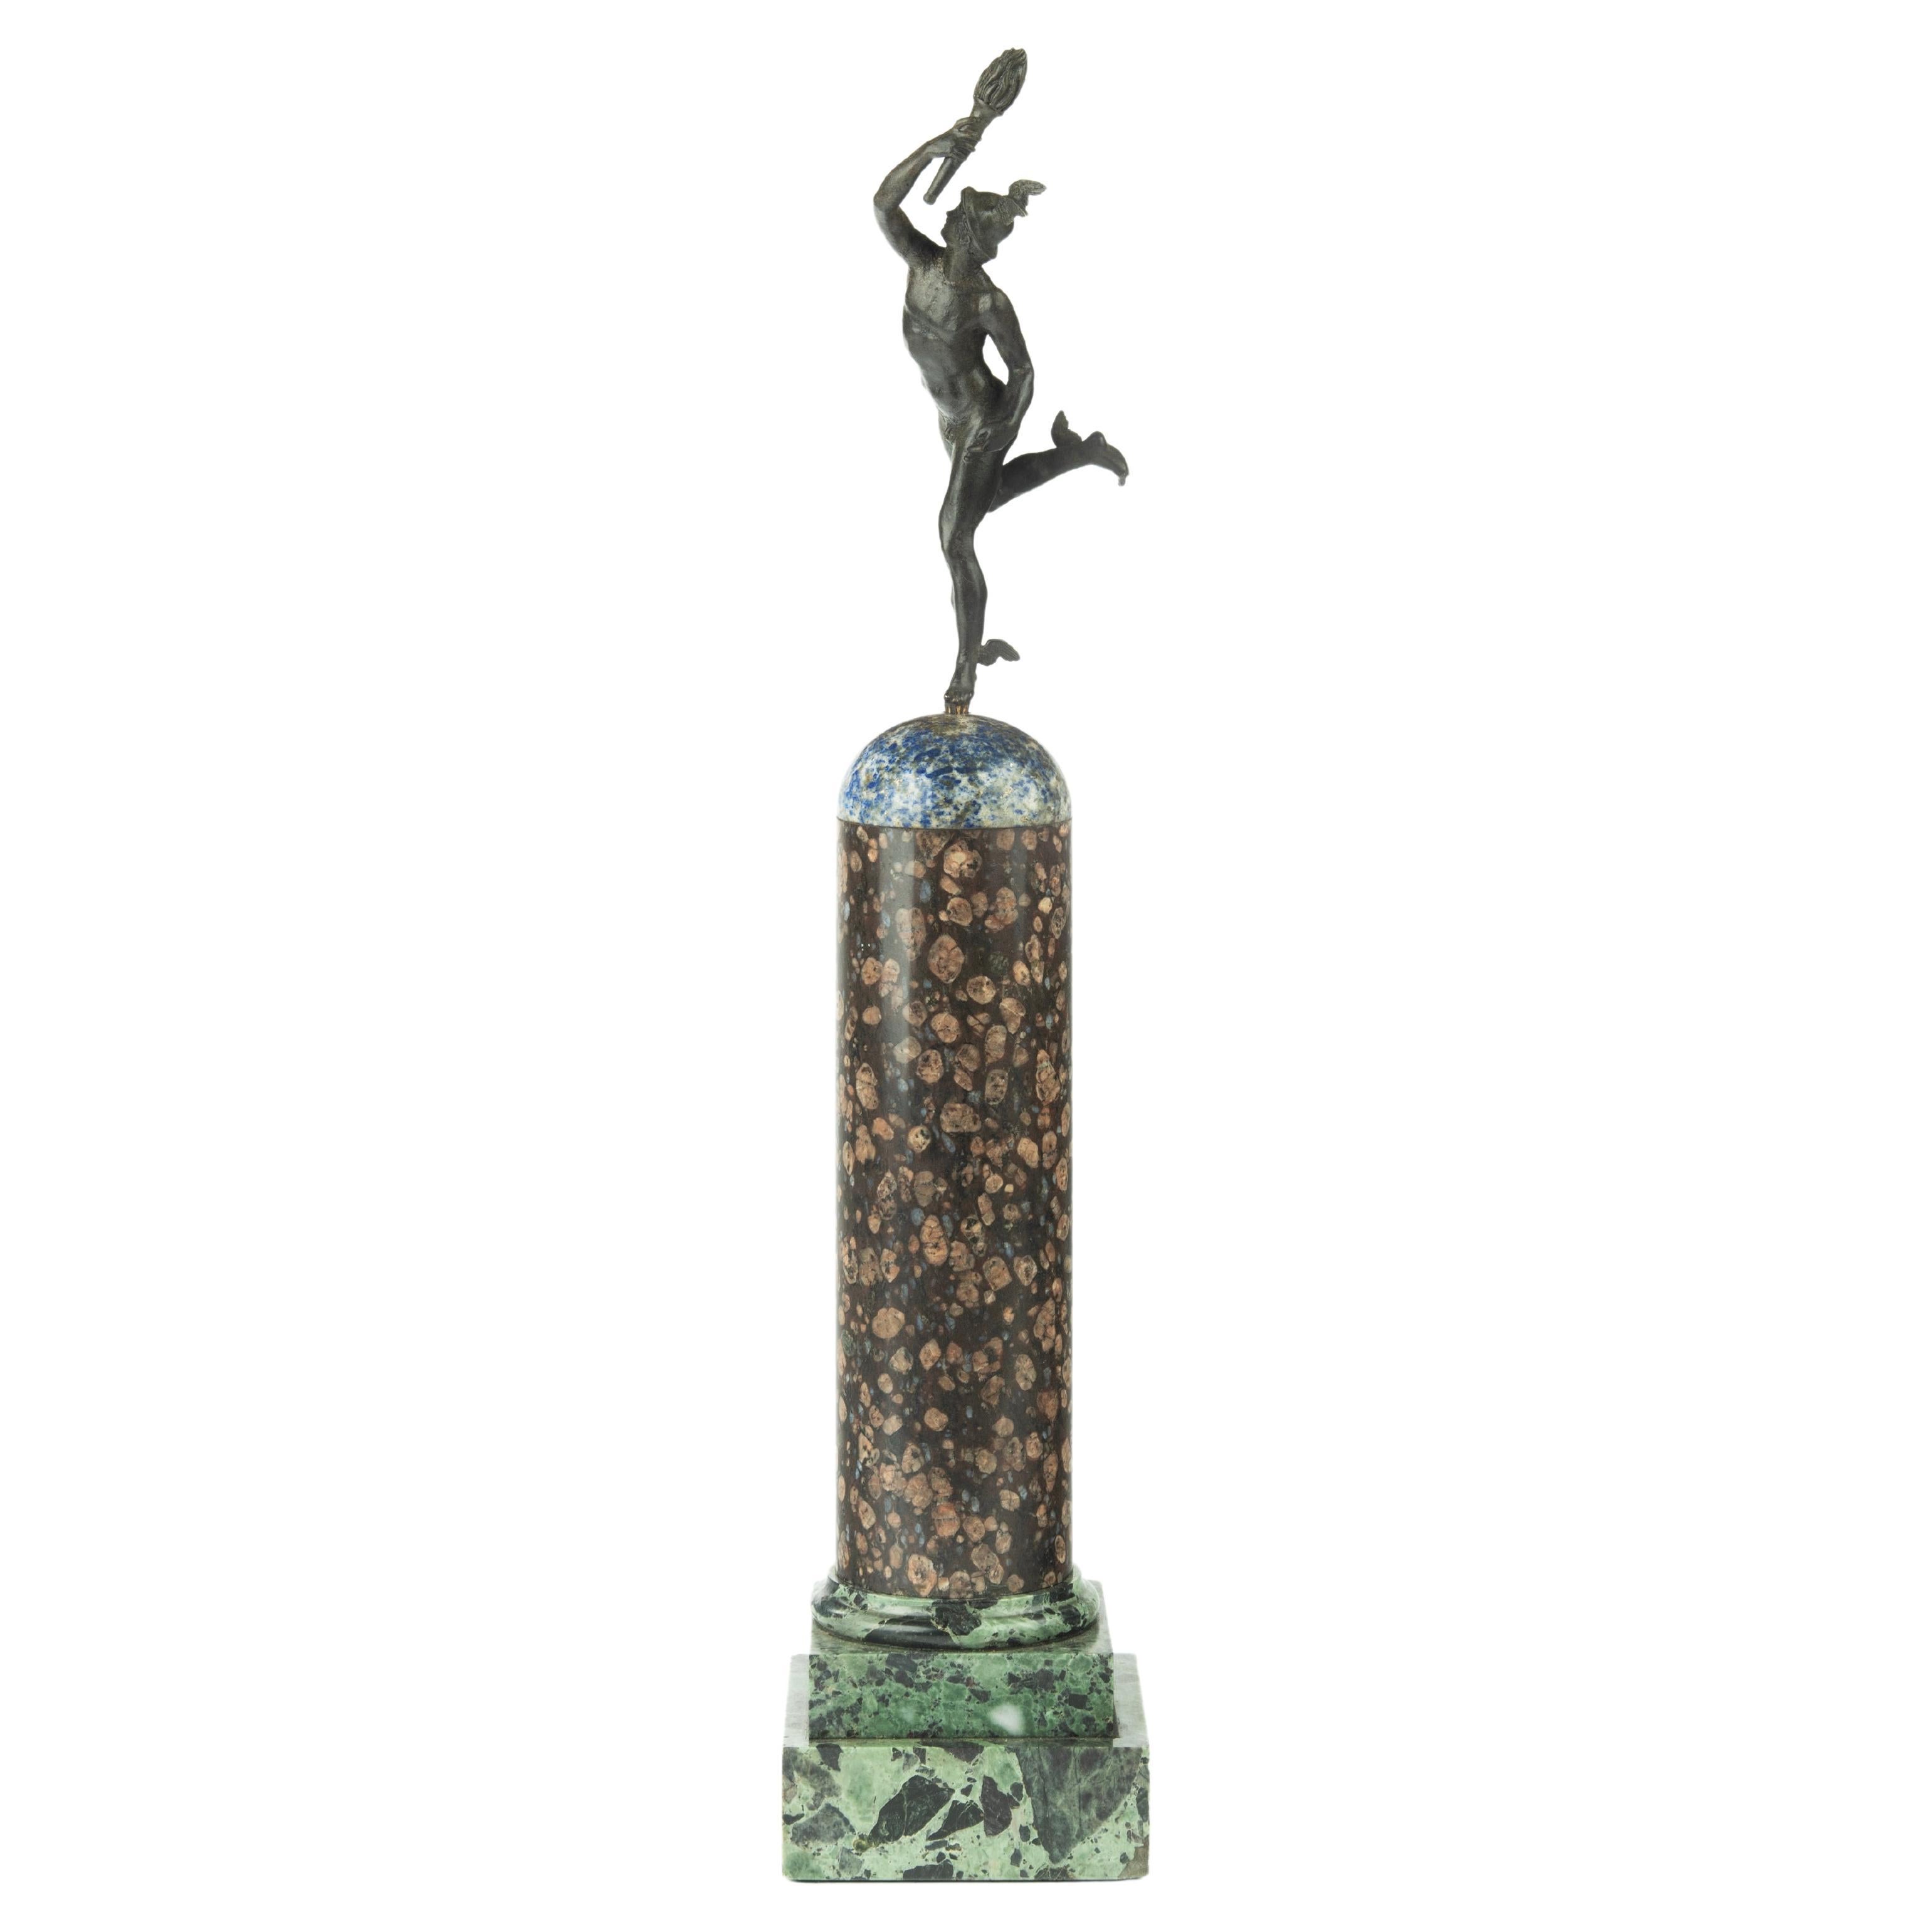 A Grand Tour Regency bronze figure of Mercury (Hermes) on a marble column For Sale